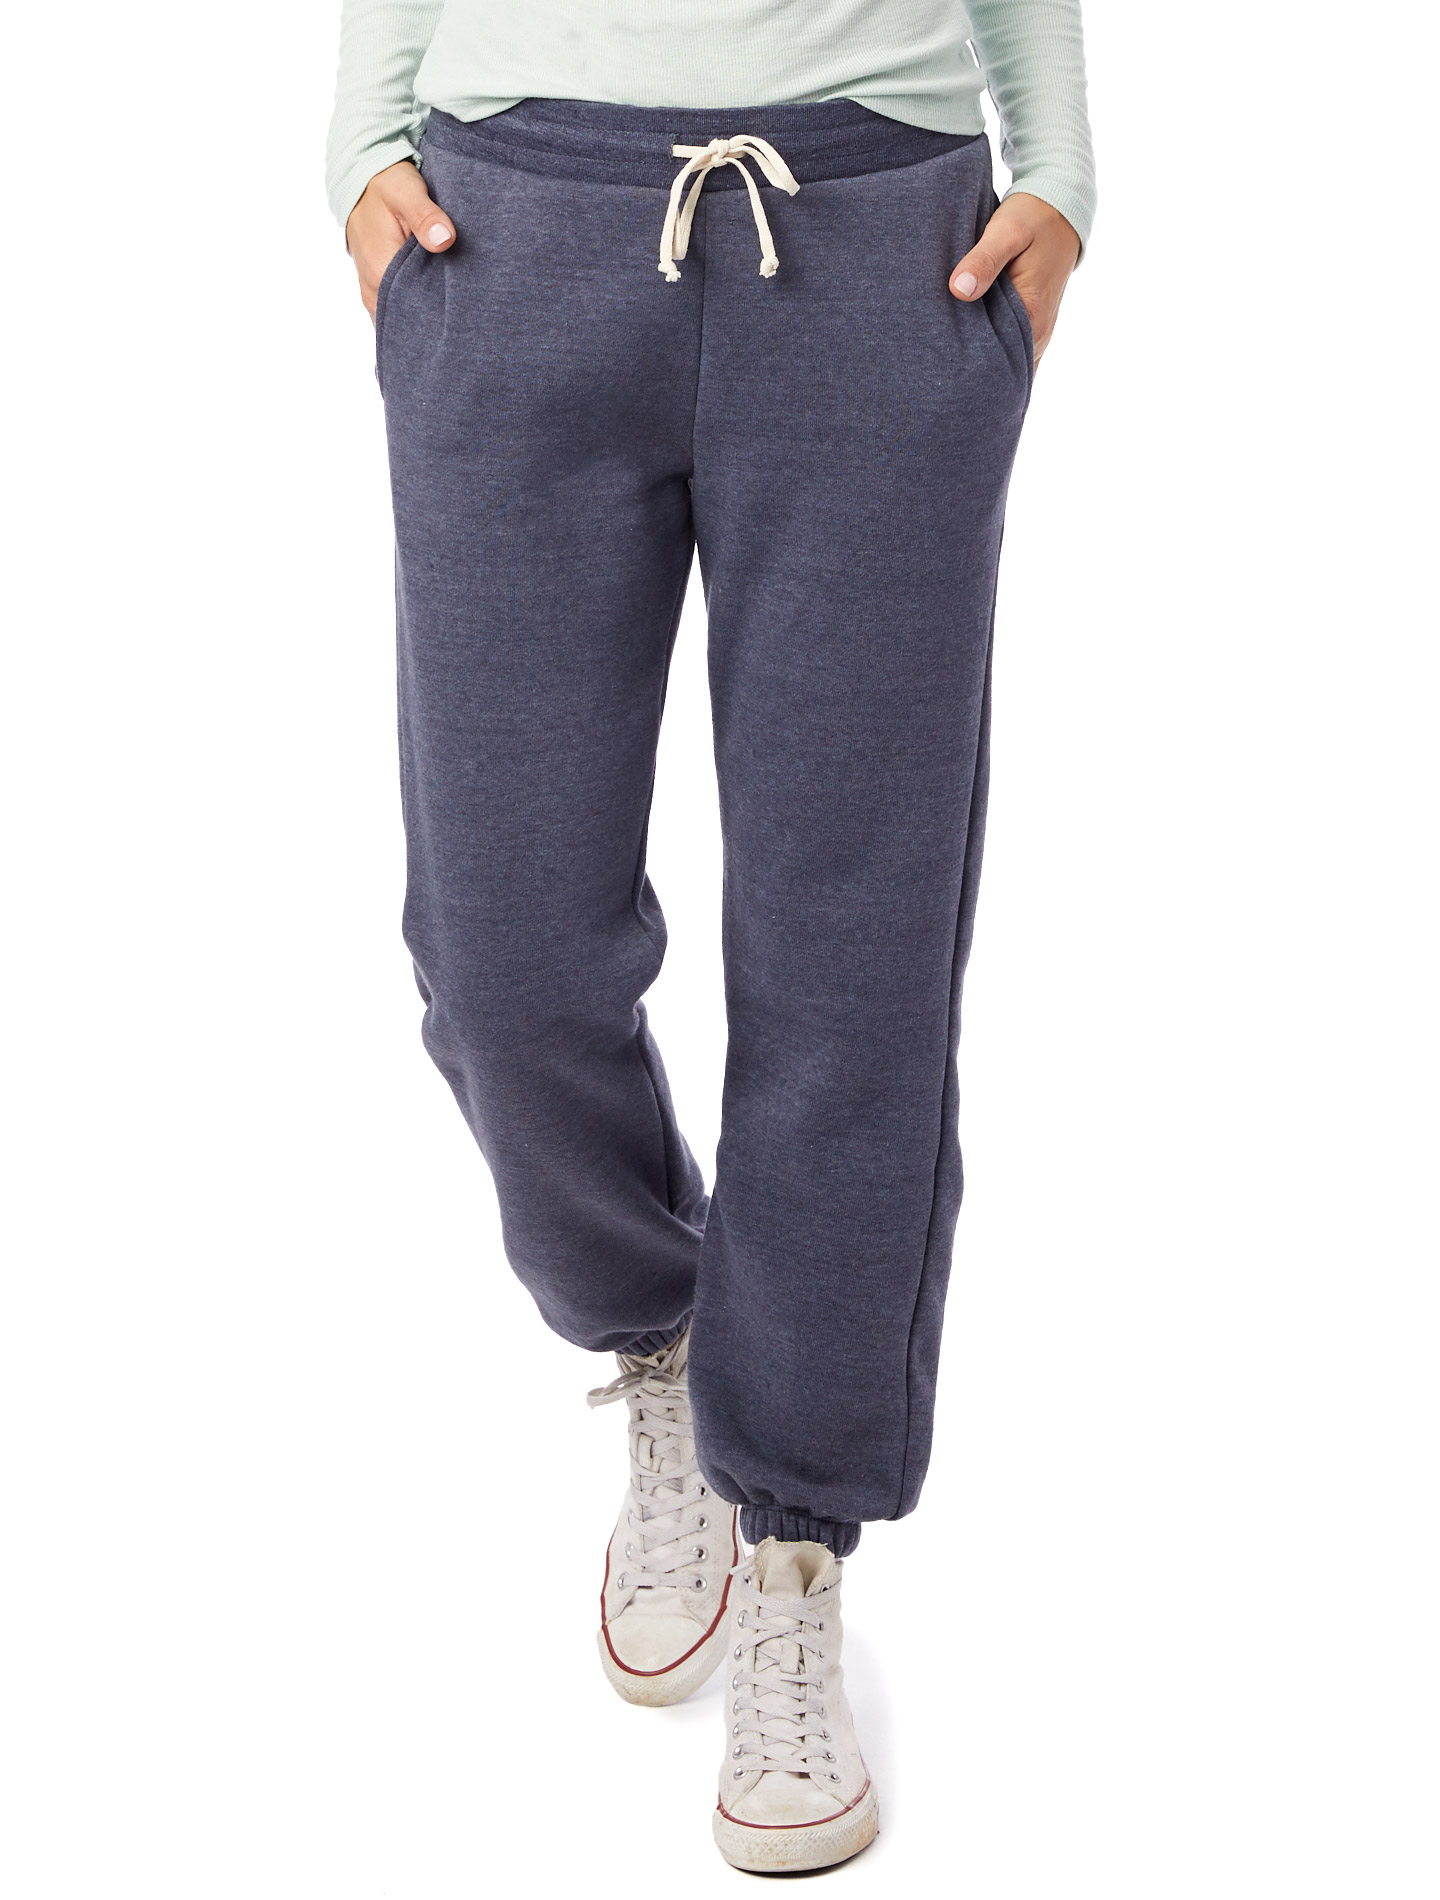 These Are The *Best* Sweatpants You Should Own For Fall And Winter ...